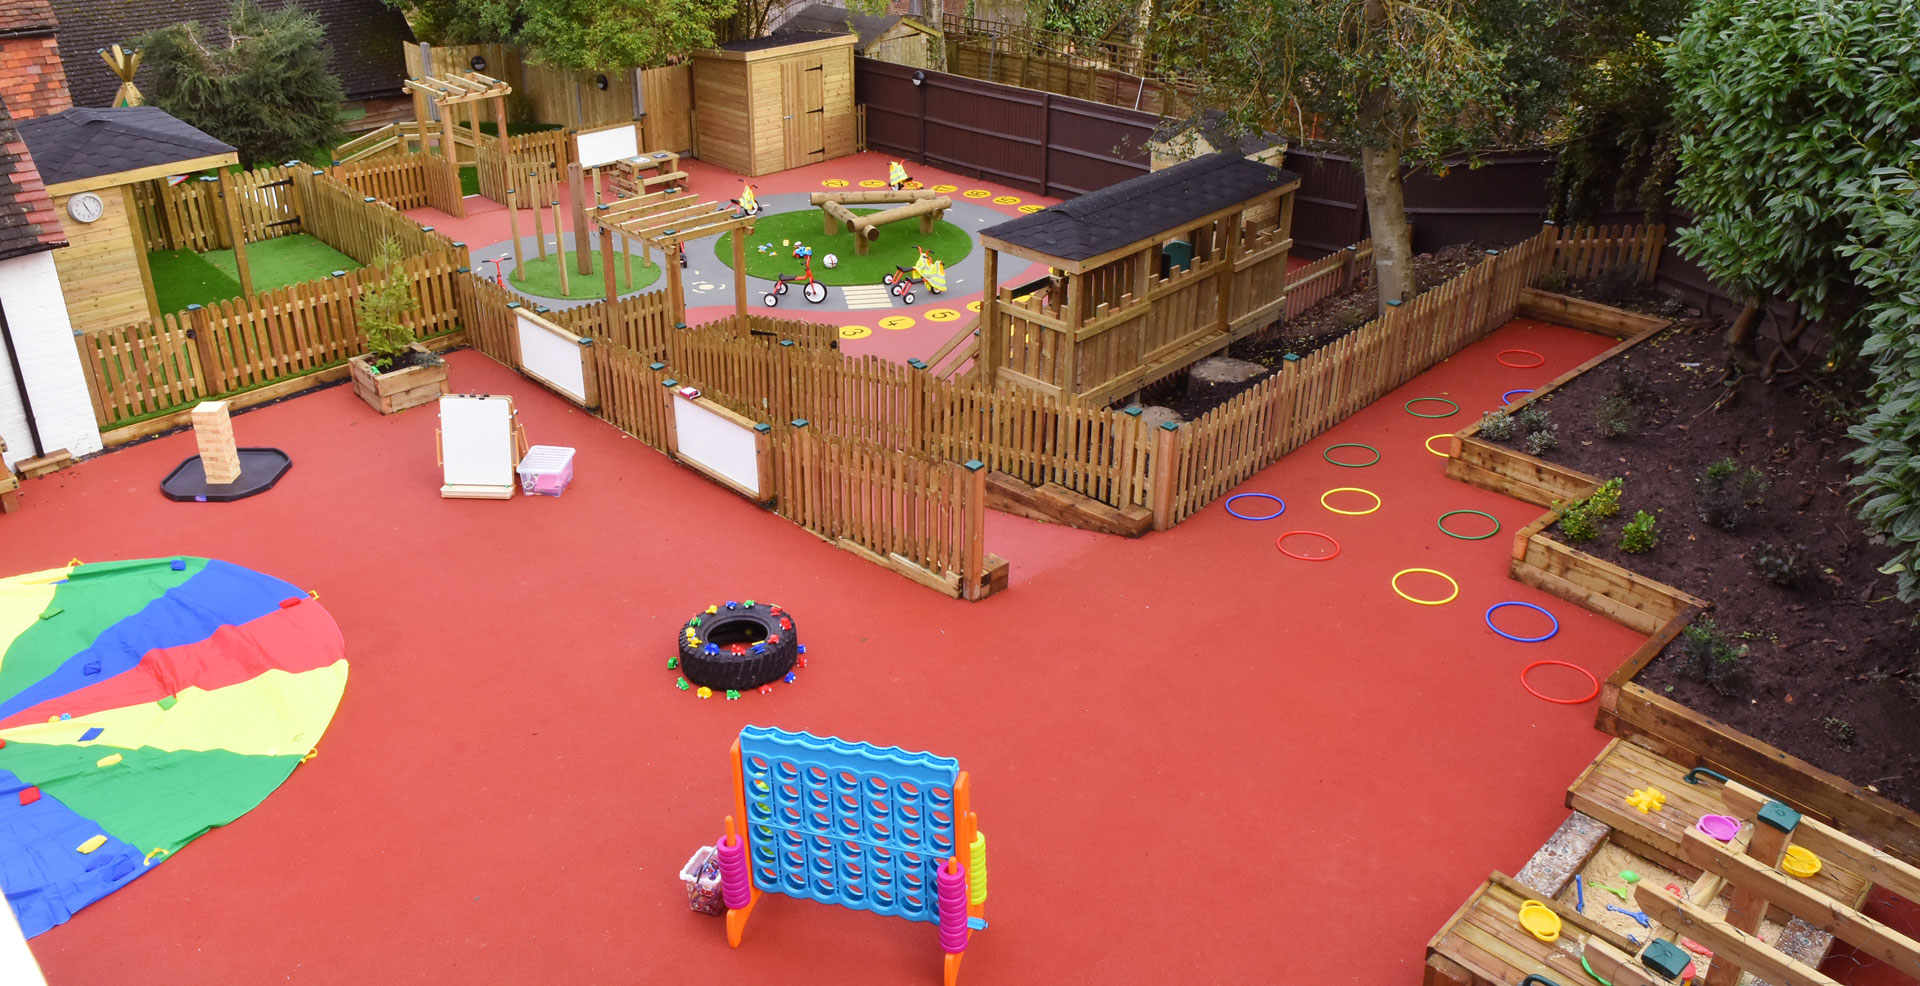 Haslemere Day Nursery and Preschool